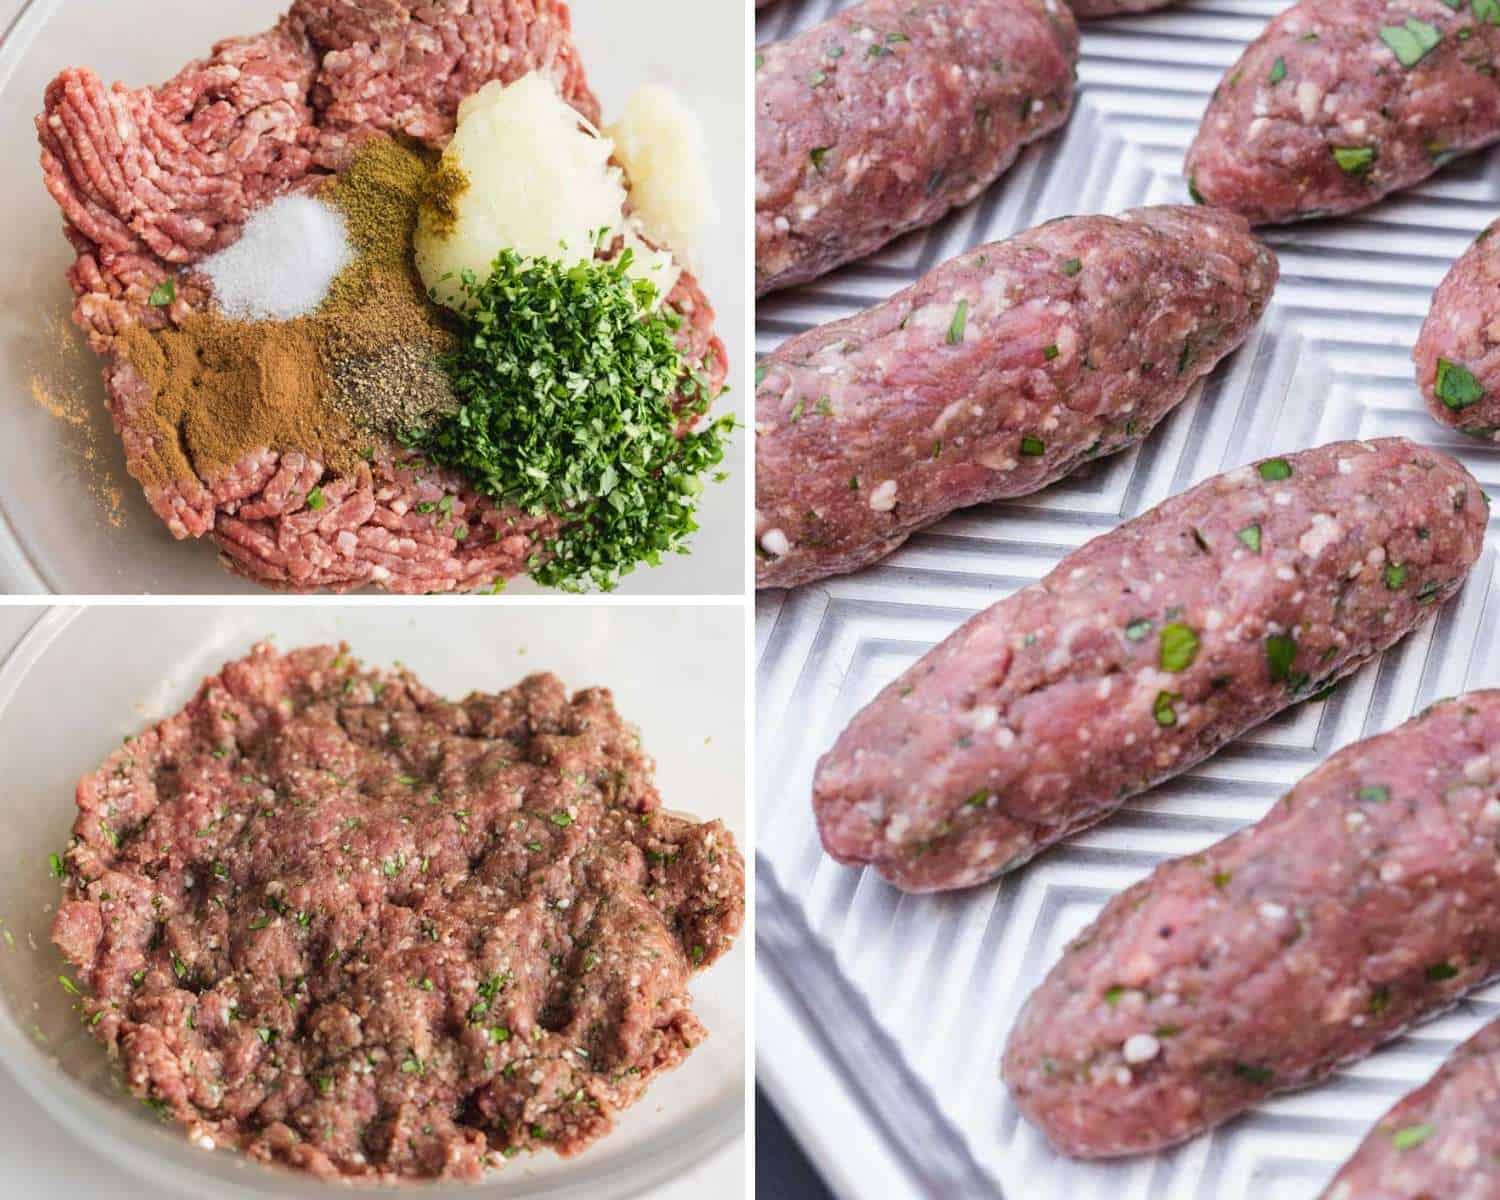 Collage of 3 images showing how to make kafta mixture and shape into kafta patties